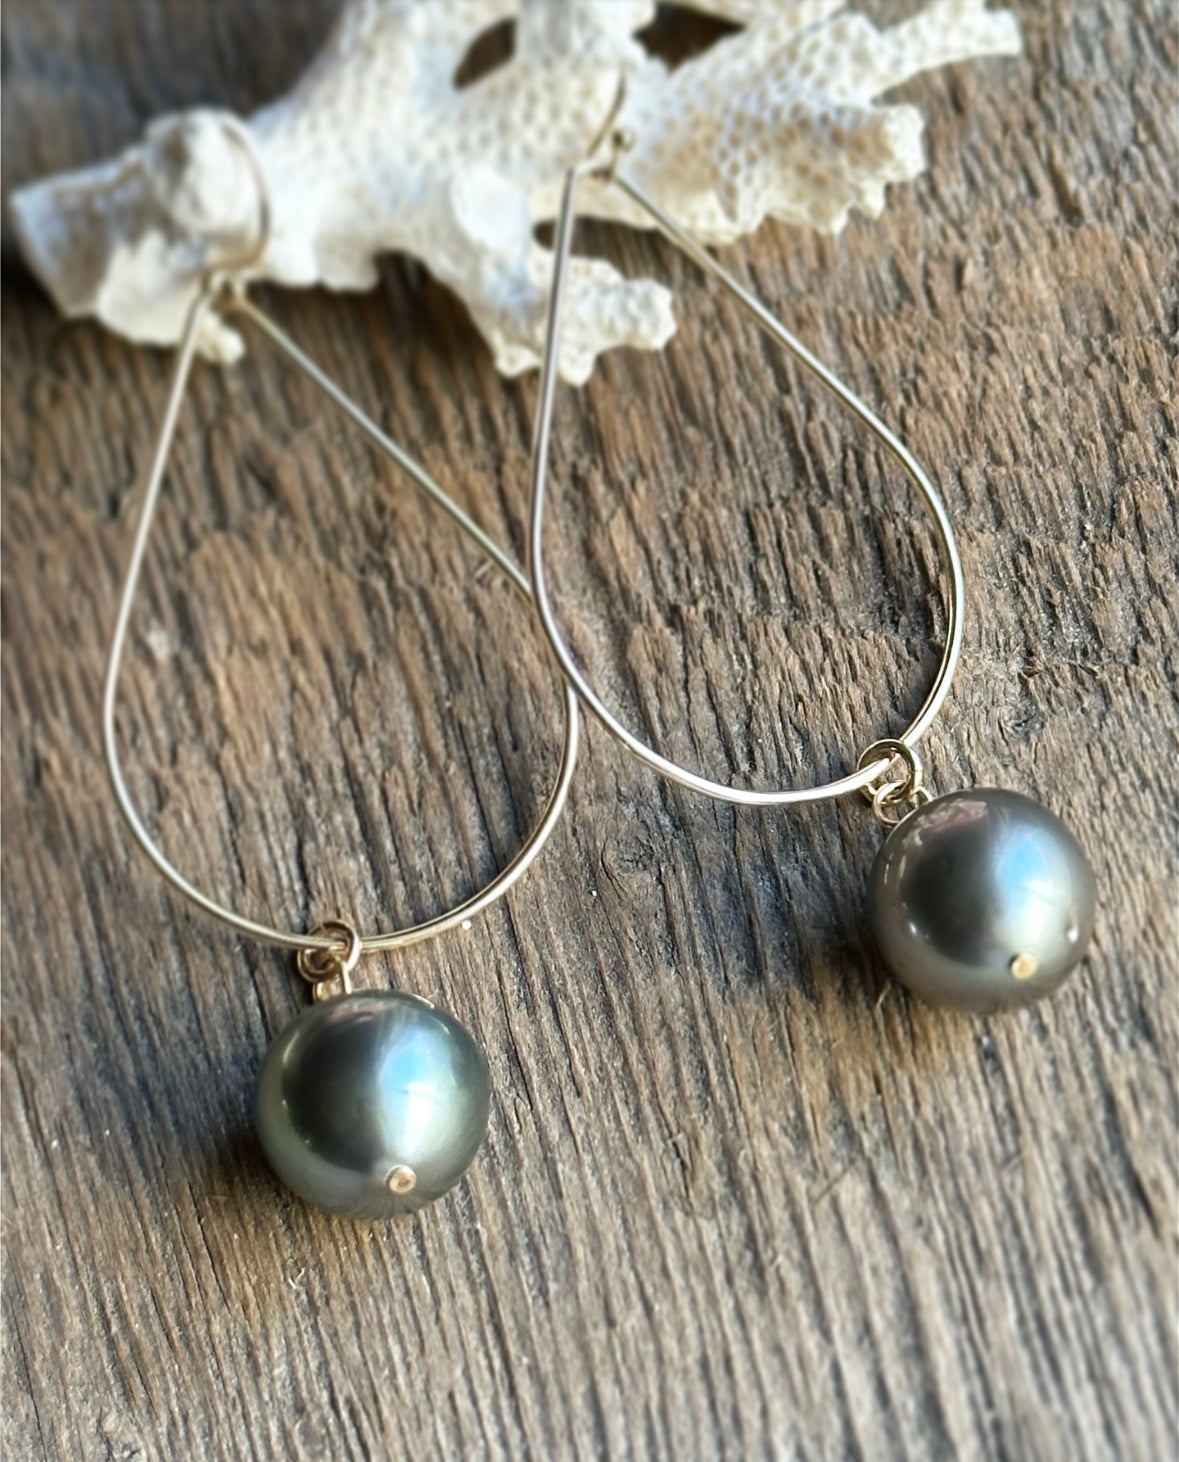 a pair of earrings with black pearls on a golden wire in the shape of ateardrop lays on white coral on a wooden background